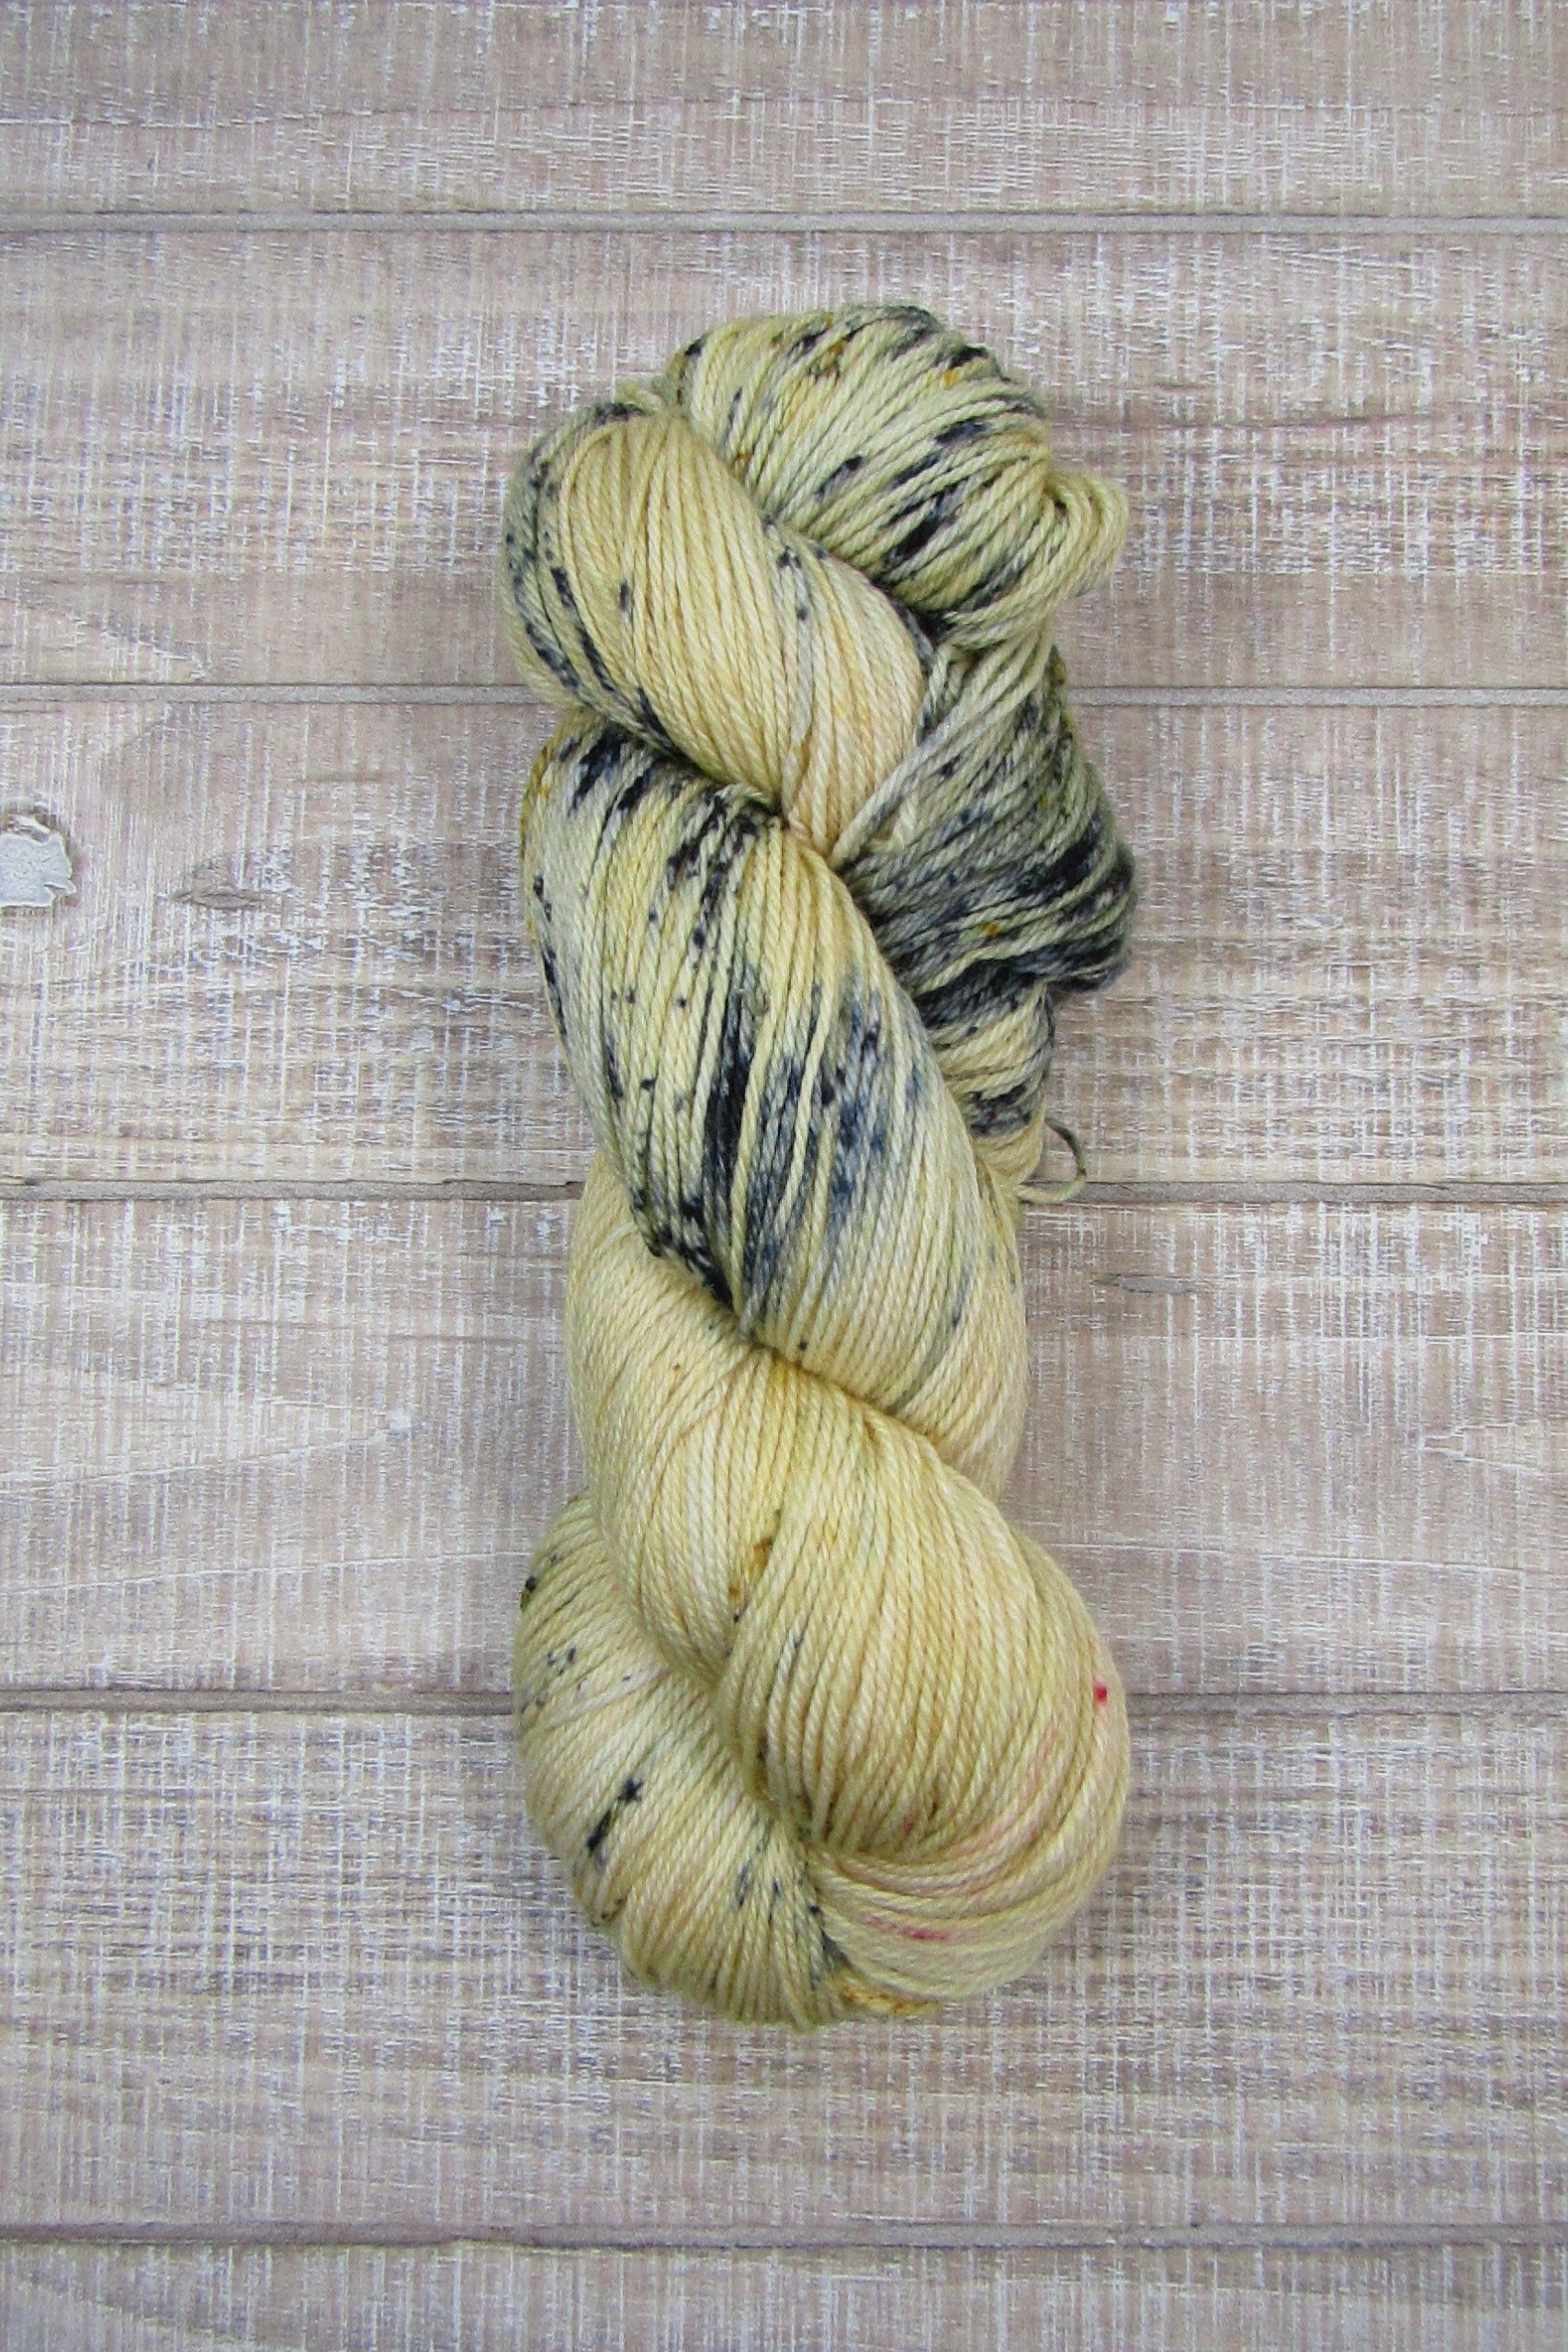 Hand-Dyed Yarn Sawyer is a main color of golden straw with speckles of blue, red and mustard.